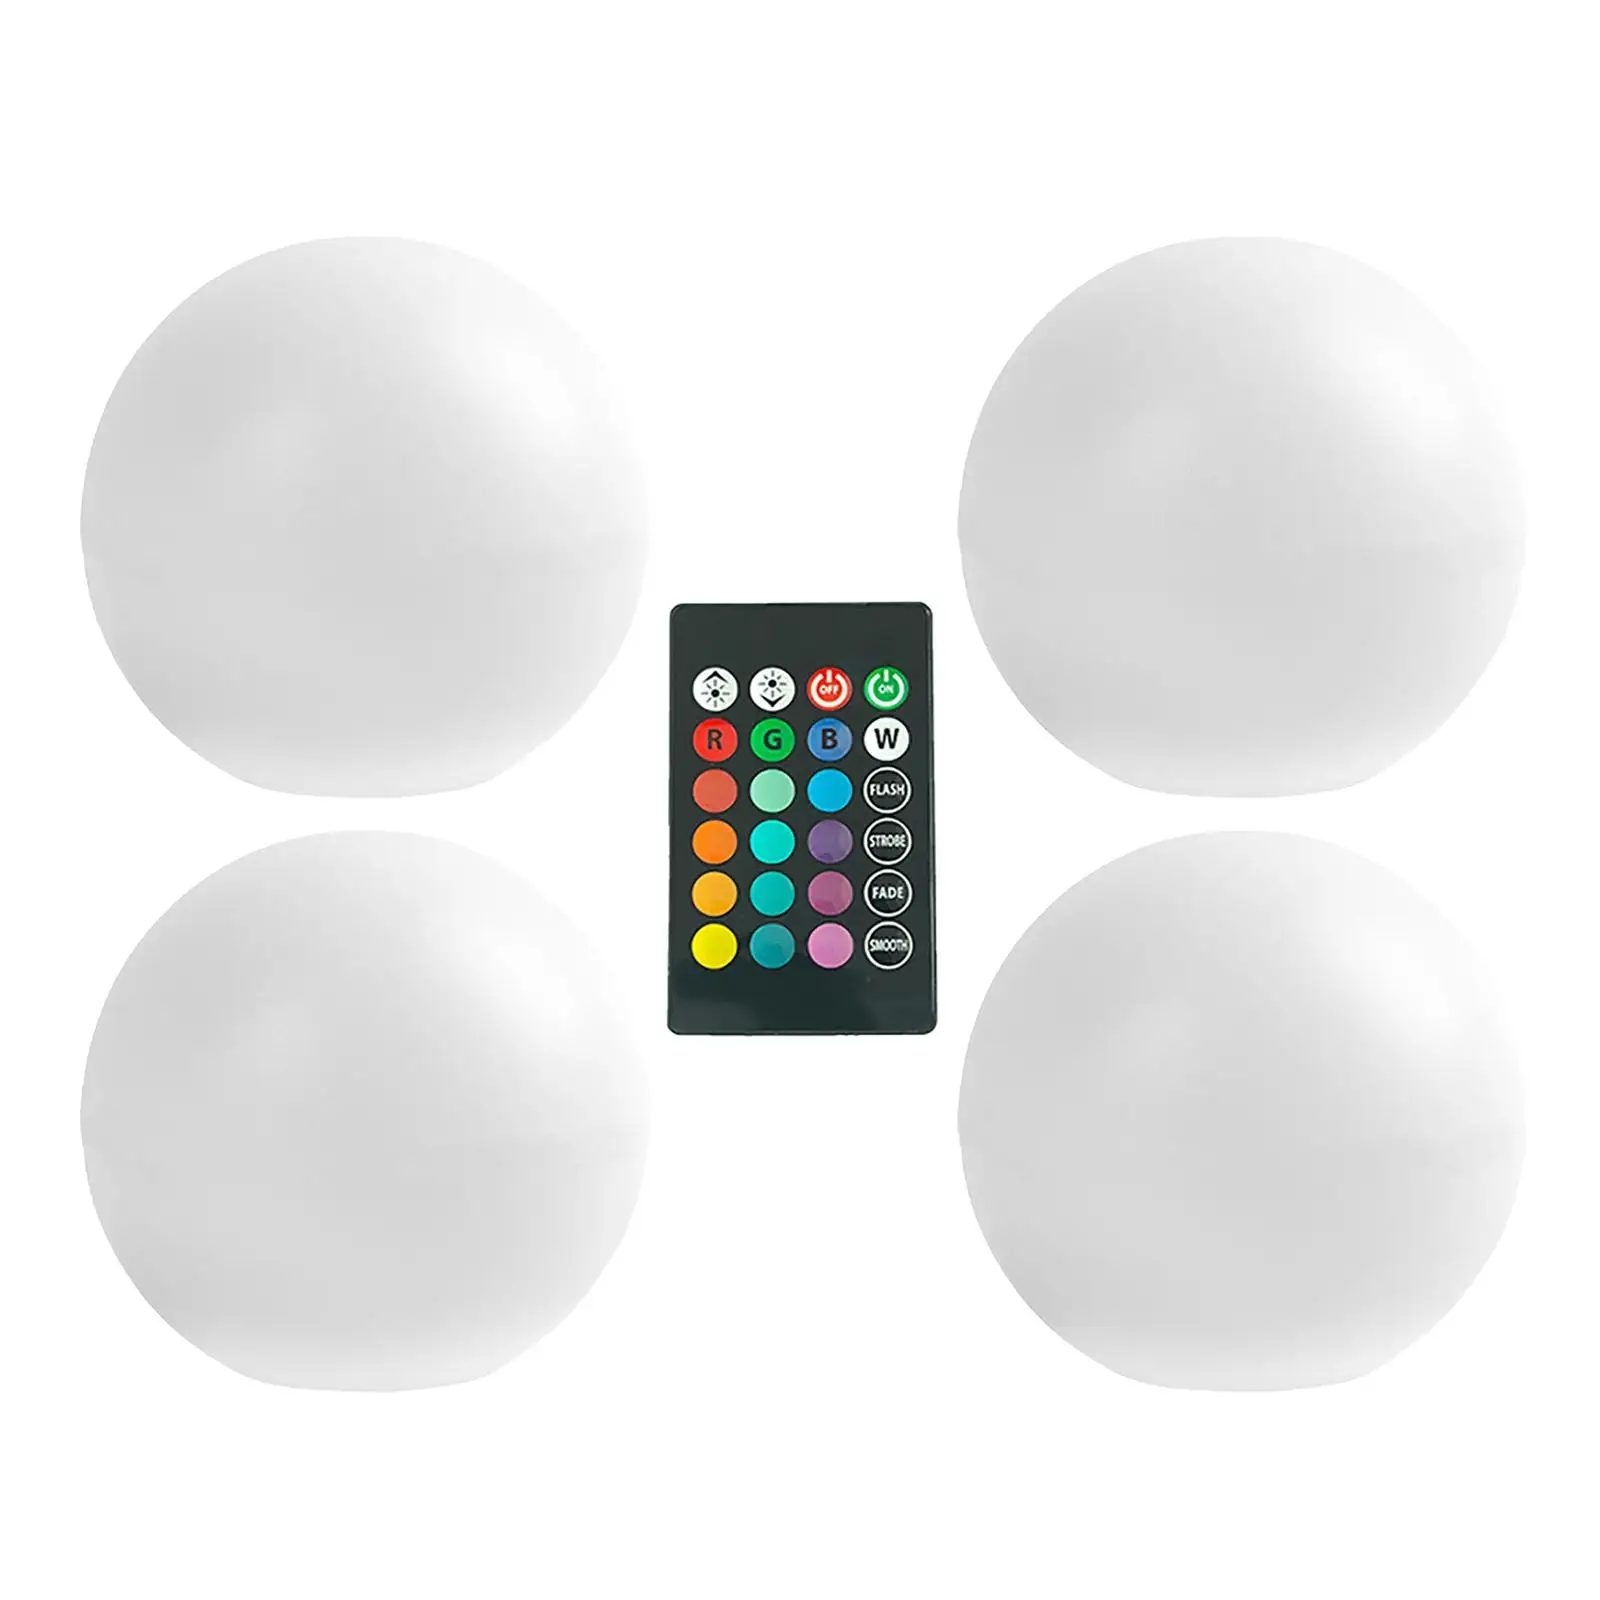 Waterproof Pool Ball Light Glowing Ball LED Colorful Pool Lamp Floating Pool Lights for Party Patio Backyard Lawn Decor